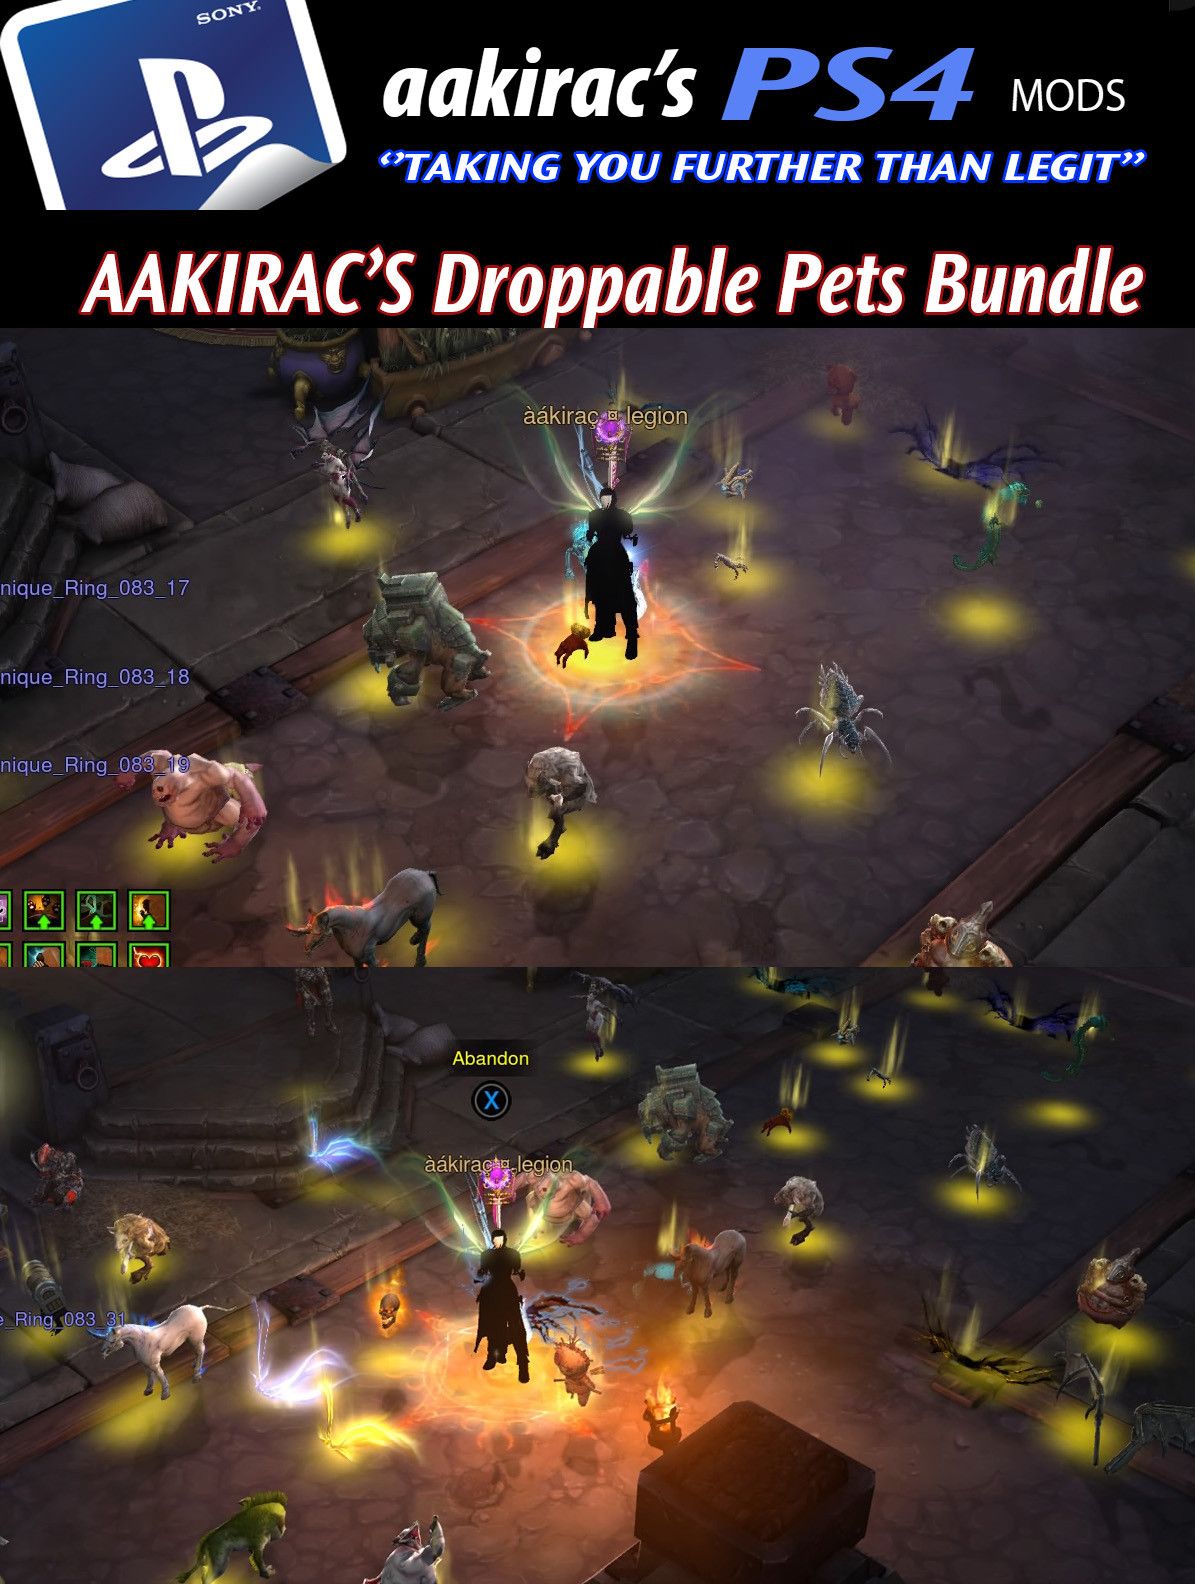 25x Random Picked Droppable Pets Diablo 3 Mods ROS Seasonal and Non Seasonal Save Mod - Modded Items and Gear - Hacks - Cheats - Trainers for Playstation 4 - Playstation 5 - Nintendo Switch - Xbox One